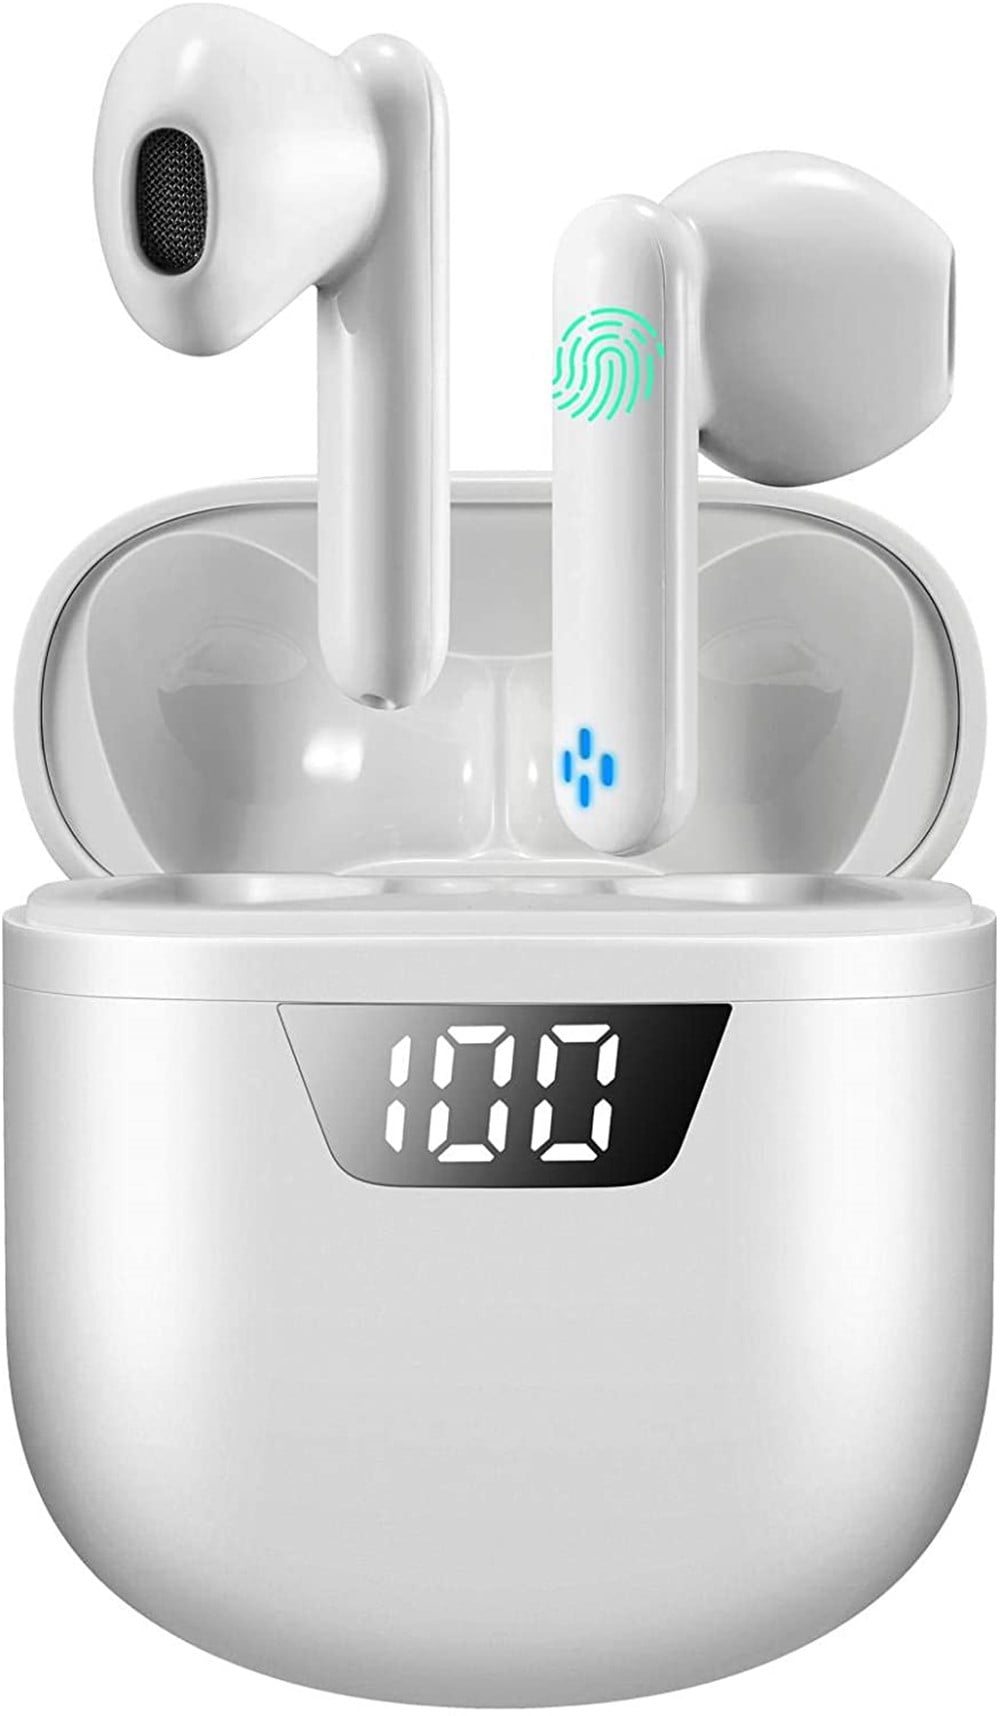 Bluetooth Headphones,Bluetooth 5.0 Wireless Earbuds,3D Surround Stereo,IPX5 Waterproof,Pop-ups Auto Pairing Fast Charging,for Apple of airpods and Airpod Sports Earphone Samsung Wireless Earbuds